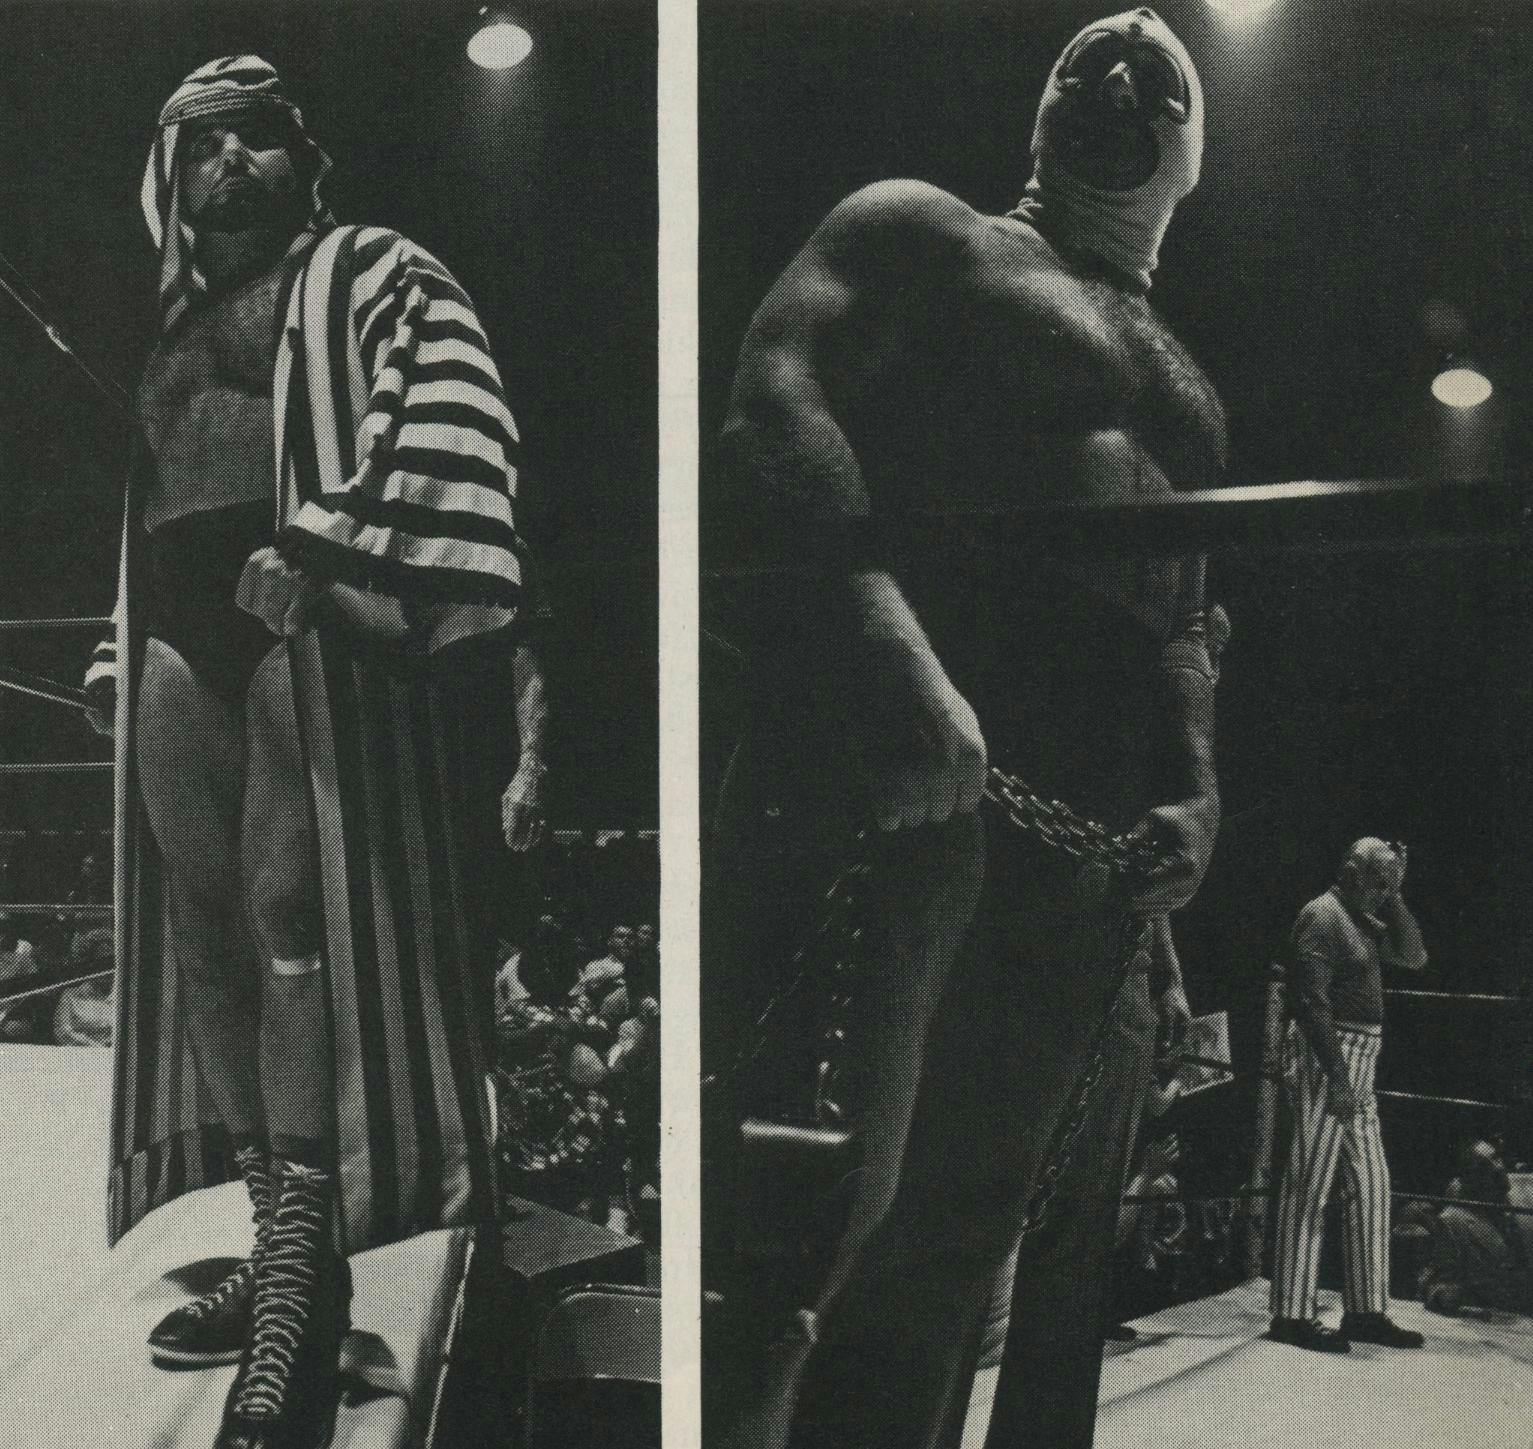 The Sheik, Sandor Akabar, defies booing crowd. Masked Dr. Malenko, aka Mr. Houston, dons chains for Russian Chain Match.